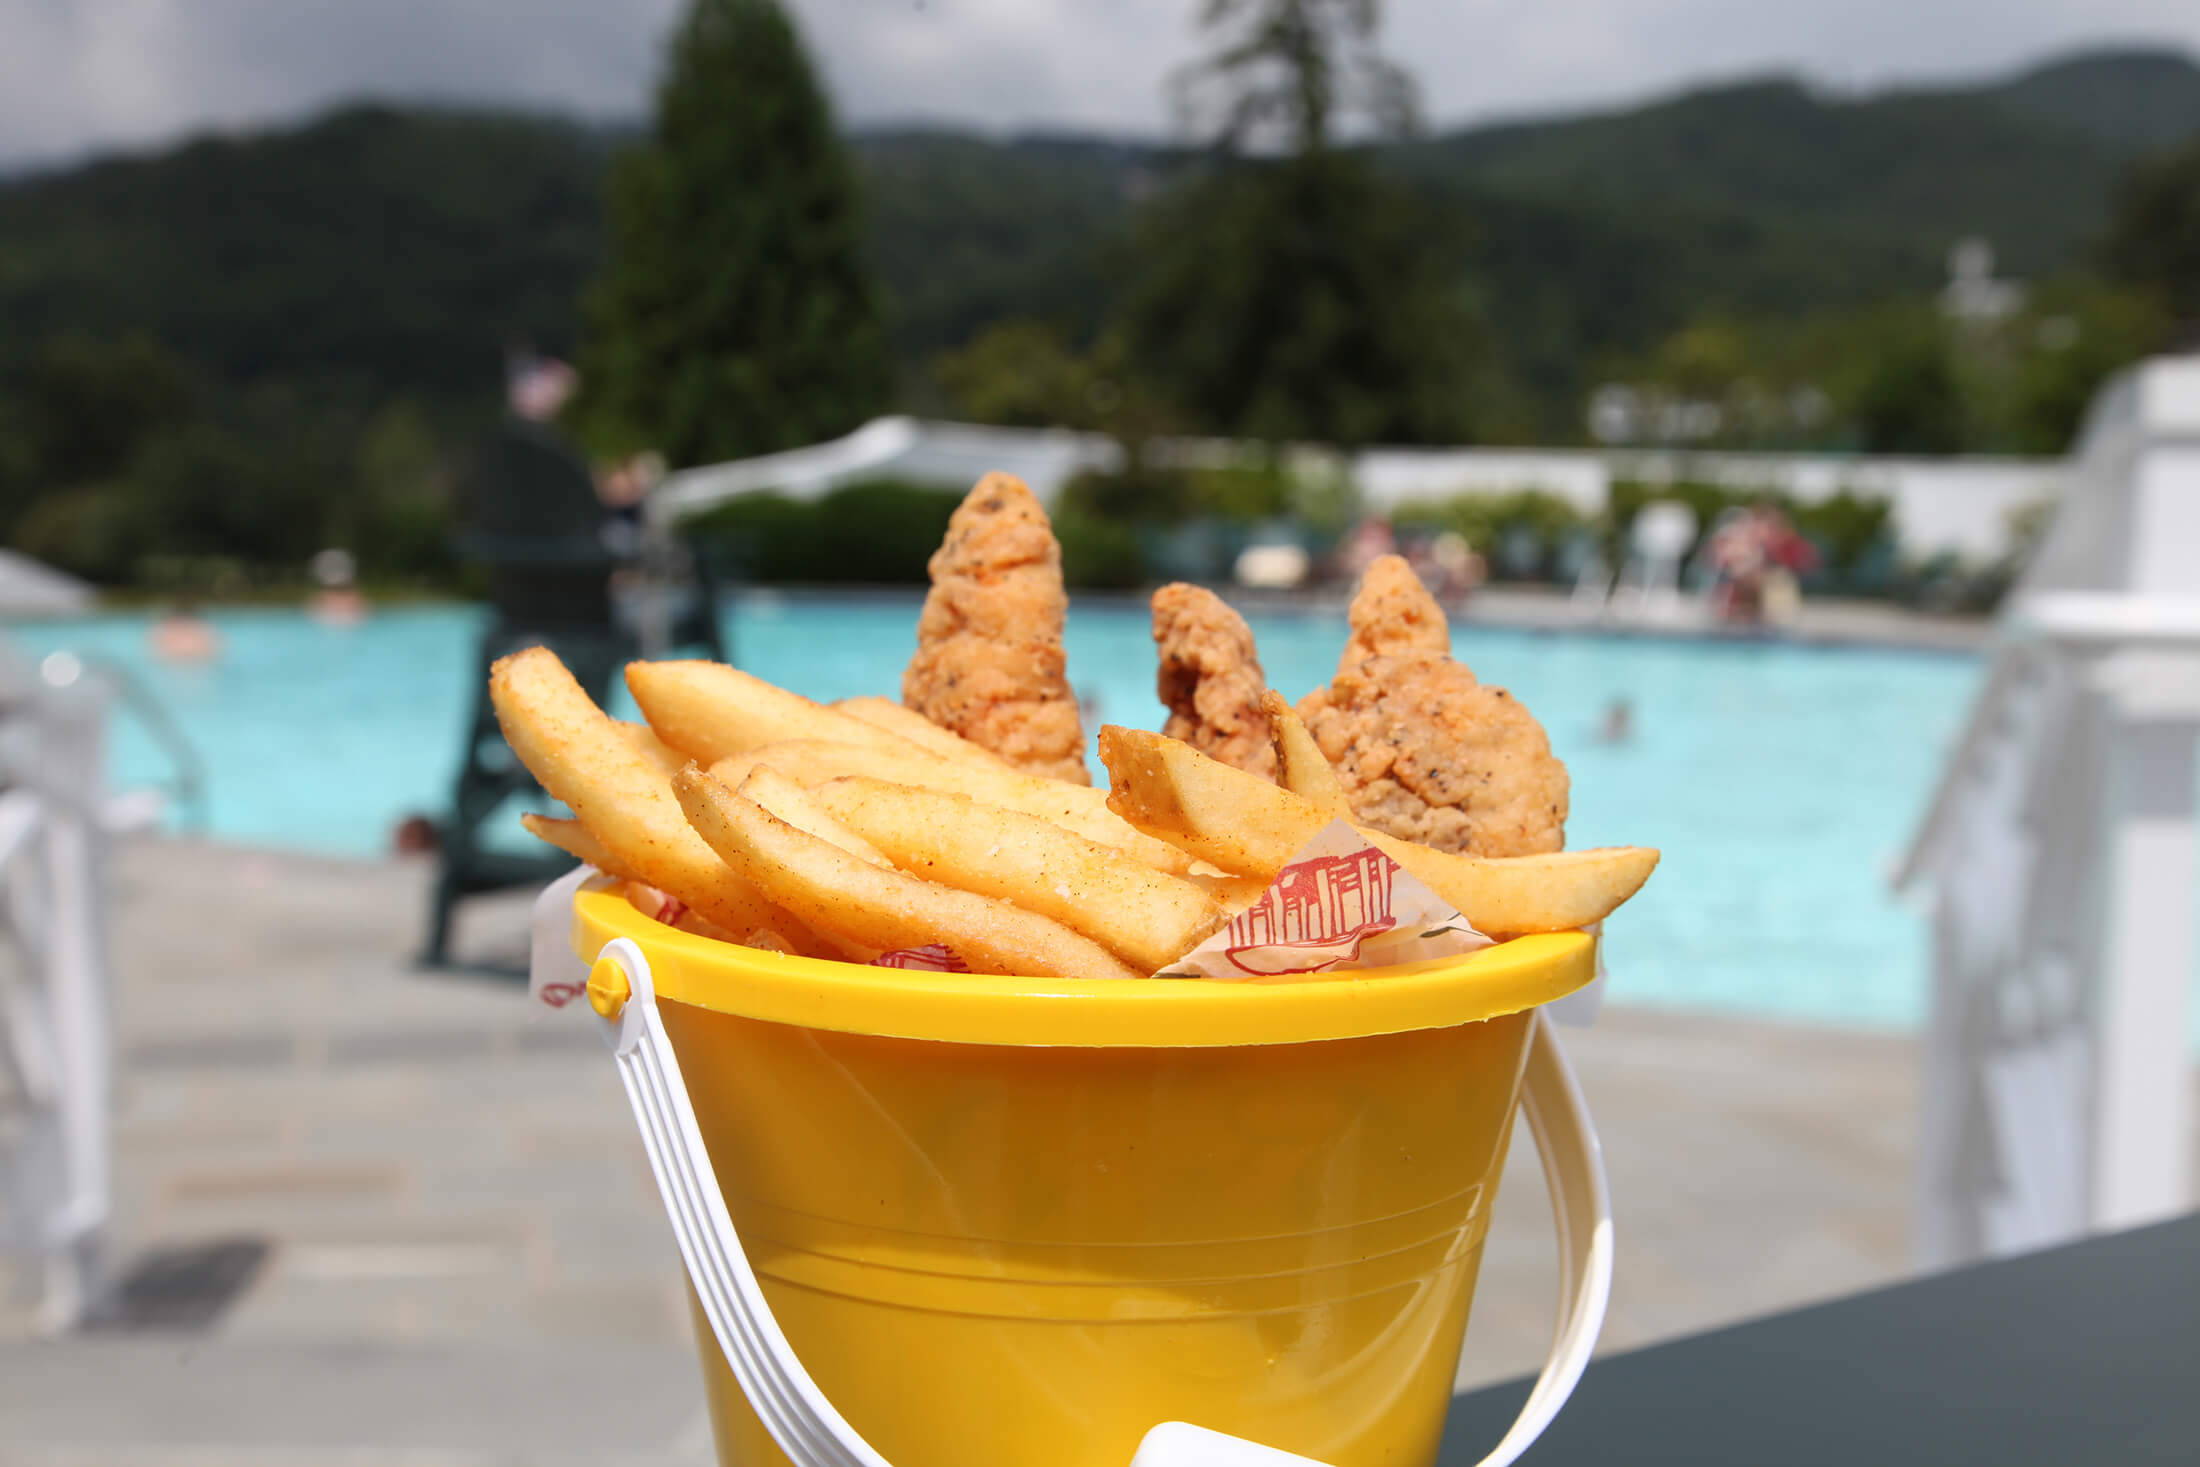 basket-of-chicken-at-pool